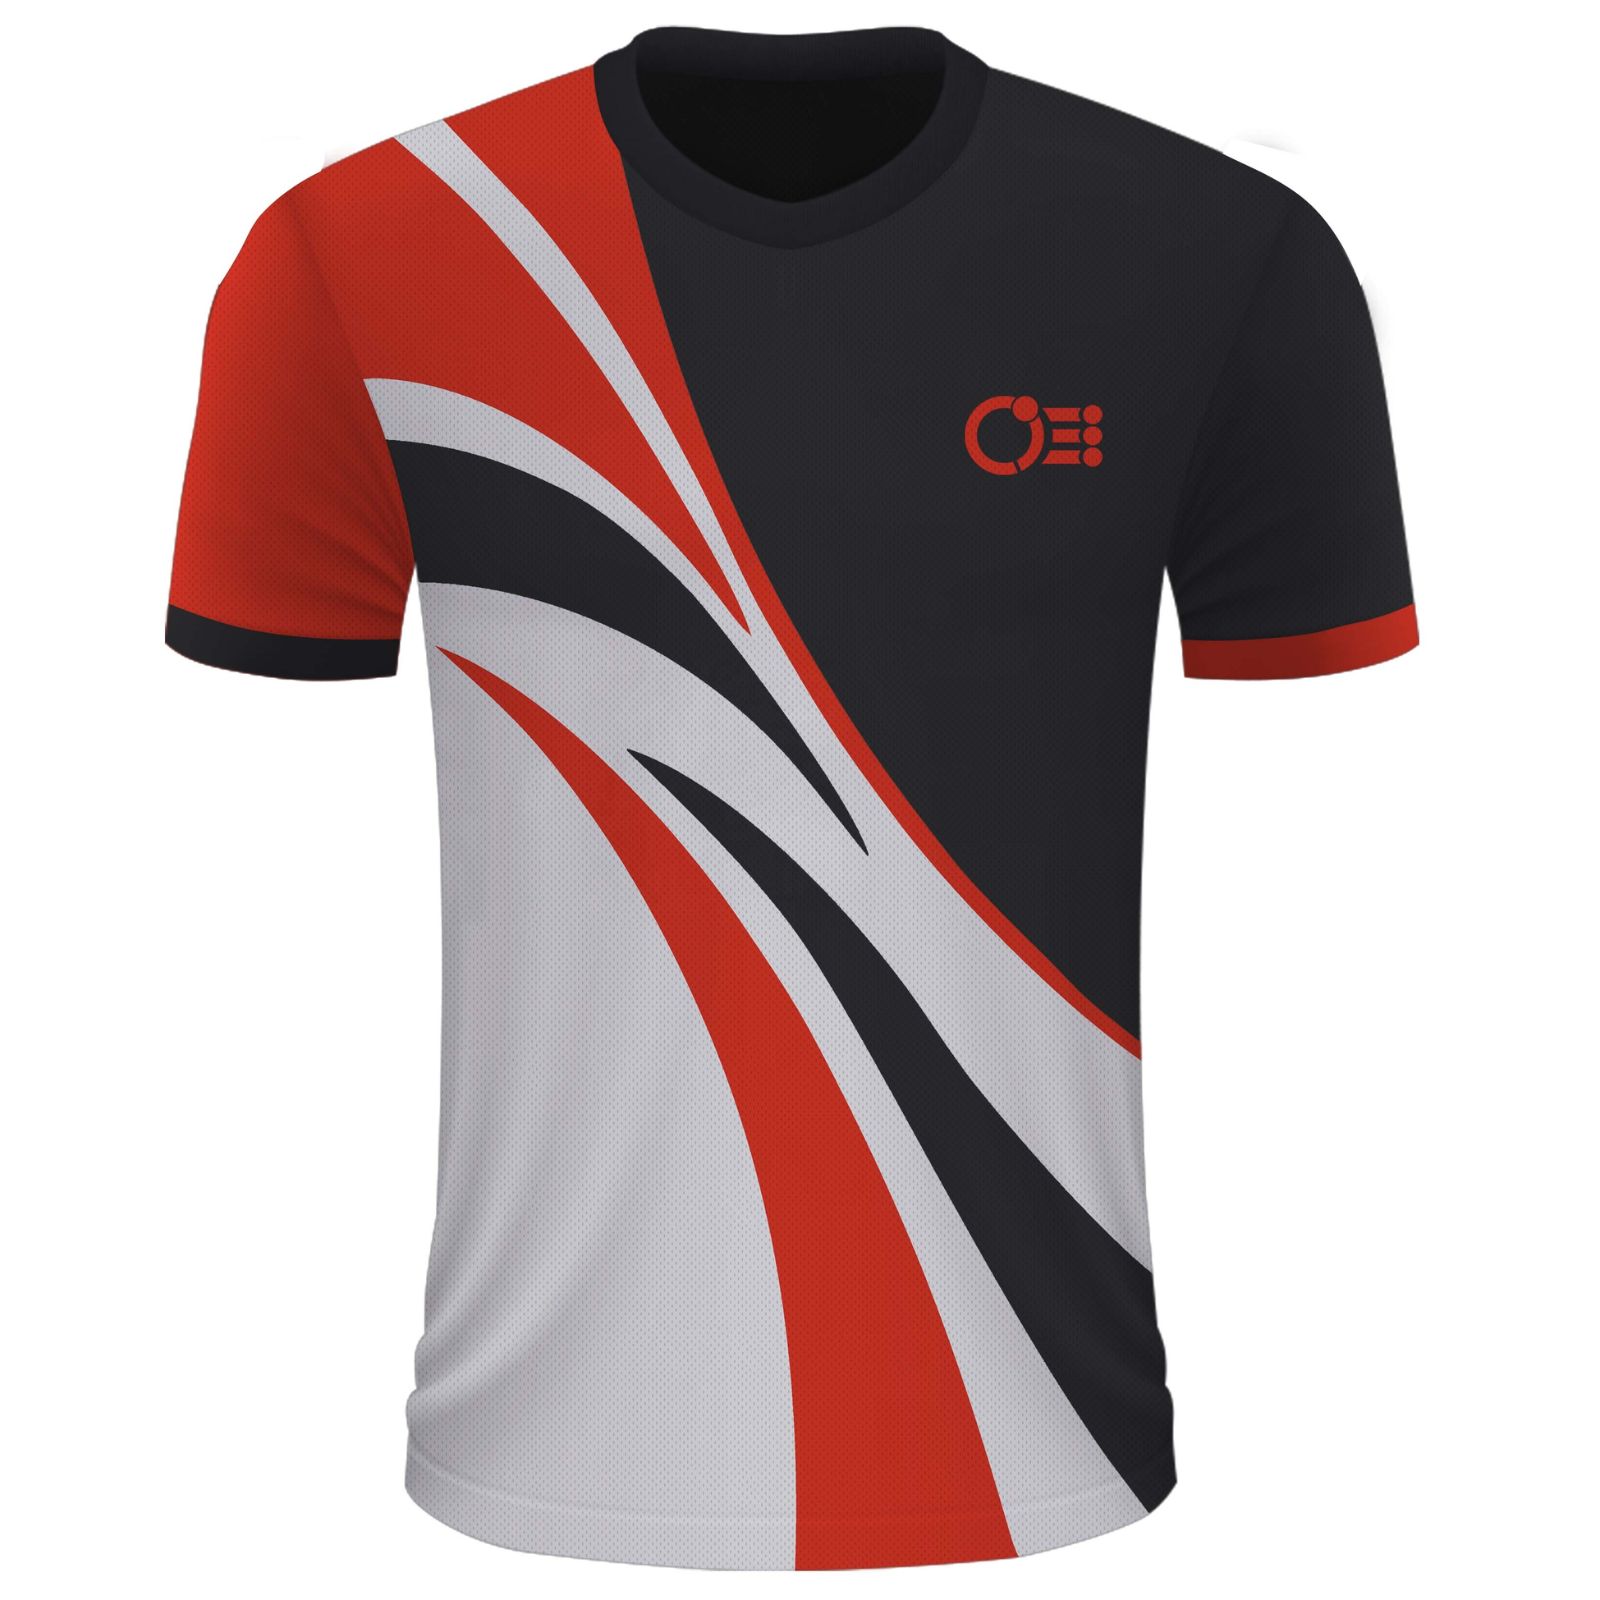 Basic sublimation Jersey Manufactured By The Best Sublimation Jersey Manufacturer In Pakistan